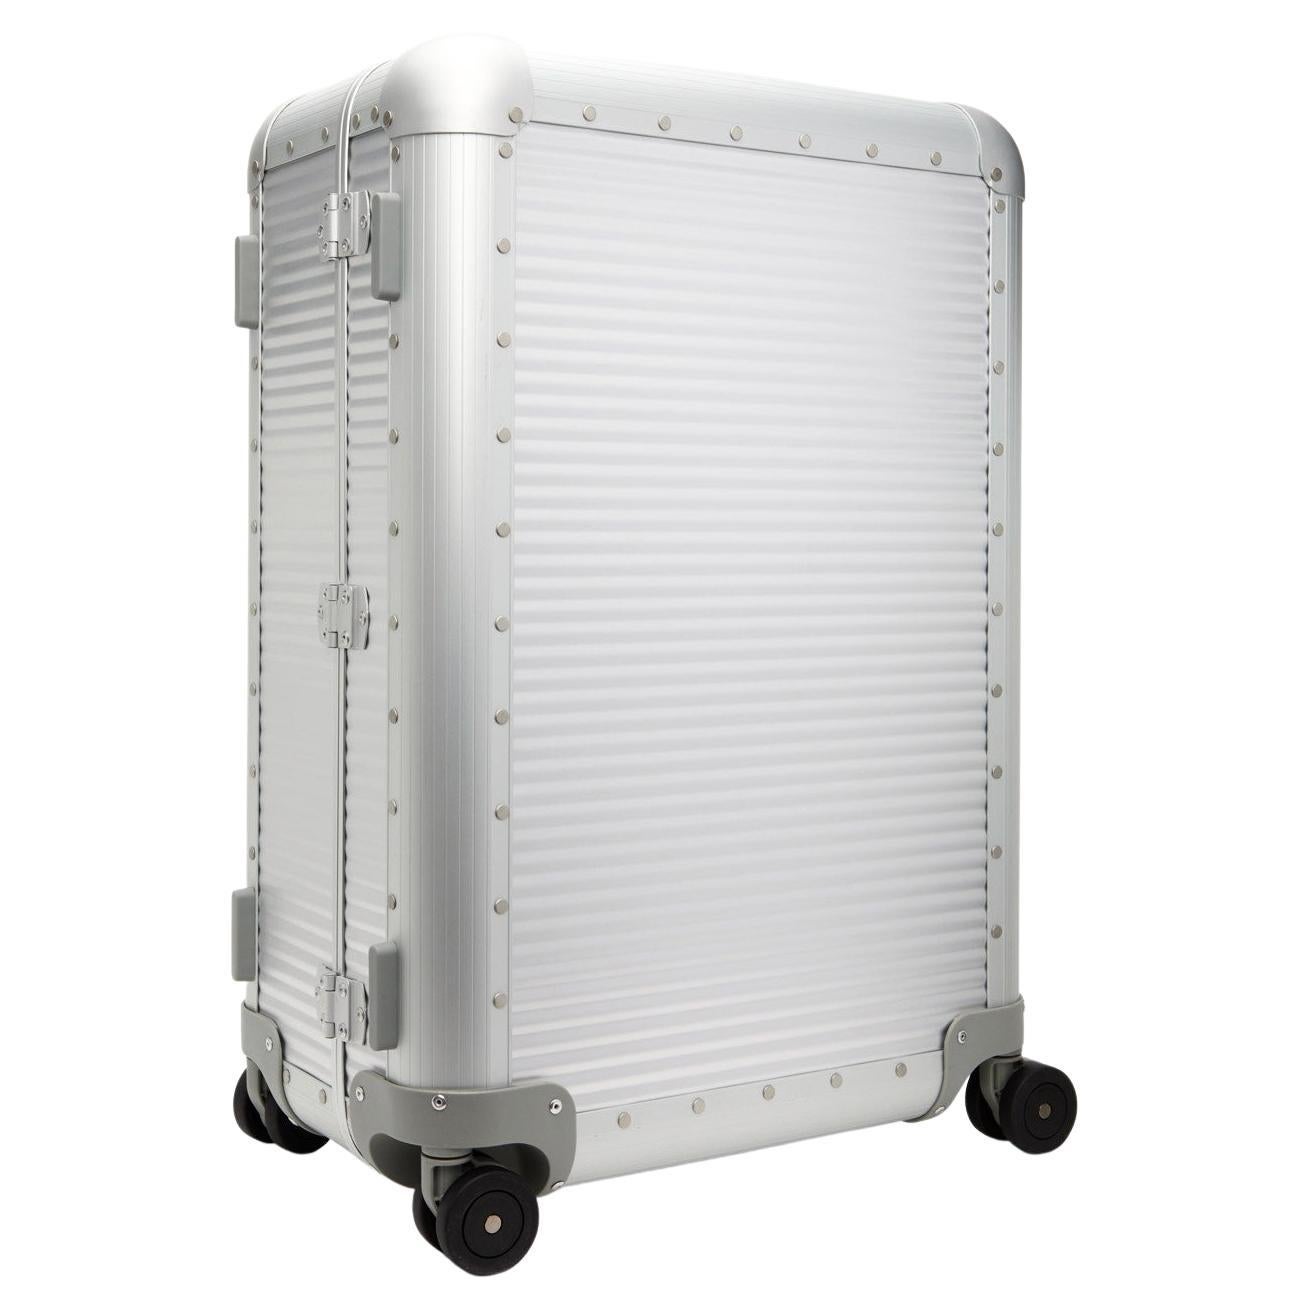 FPM MILANO moonlight silver bank spinner 68 suitcase. Aluminum shell suitcase in silver.
· Single-stage telescoping handle
· Leather grab handle at top and side
· Four dual wheels
· Hinged double latch lock closures
· Integrated TSA key lock